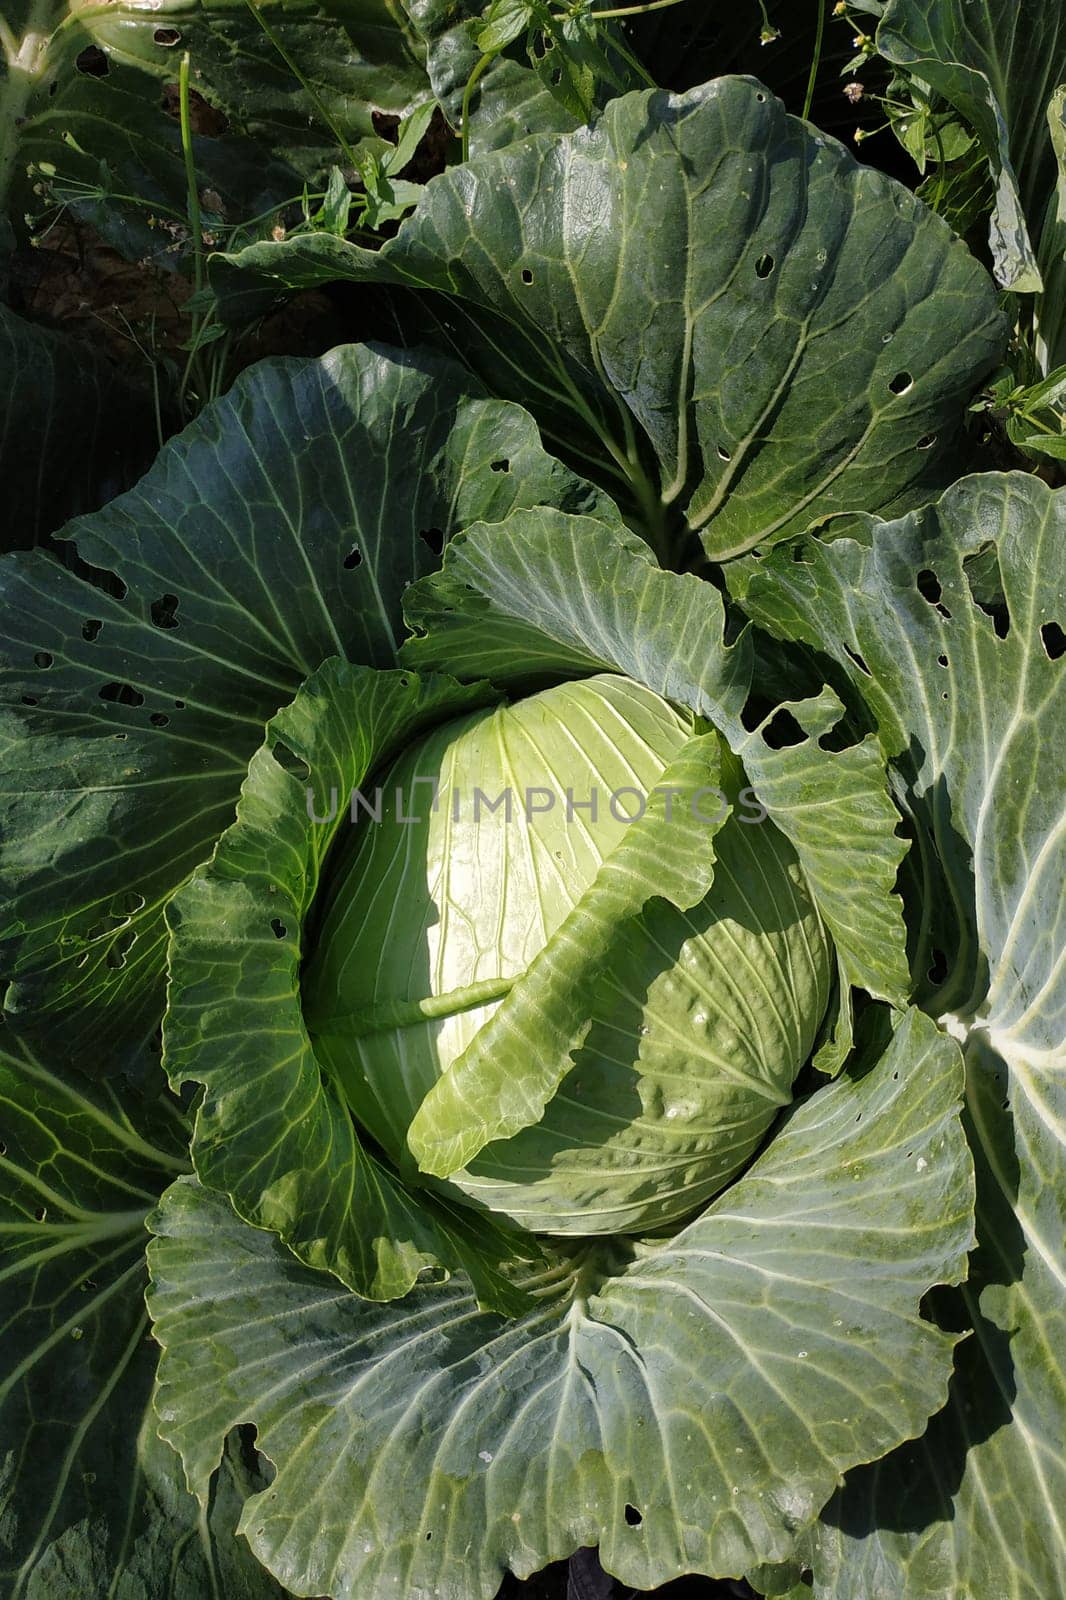 One head of large green cabbage in the garden. by Niko_Cingaryuk